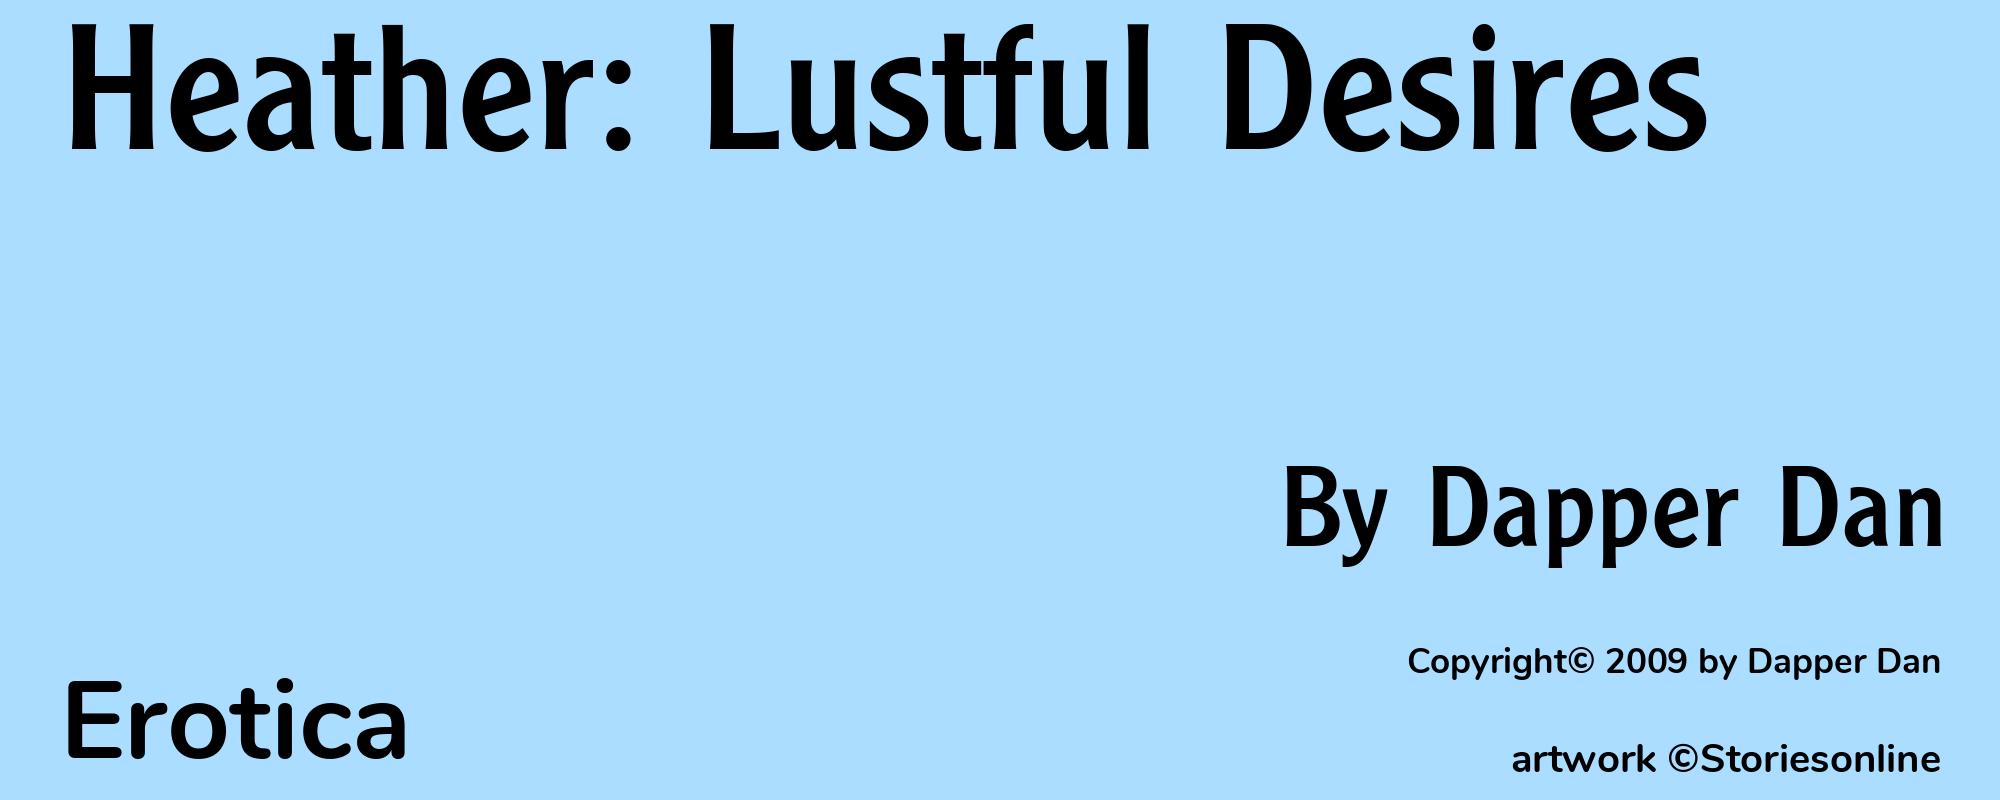 Heather: Lustful Desires - Cover